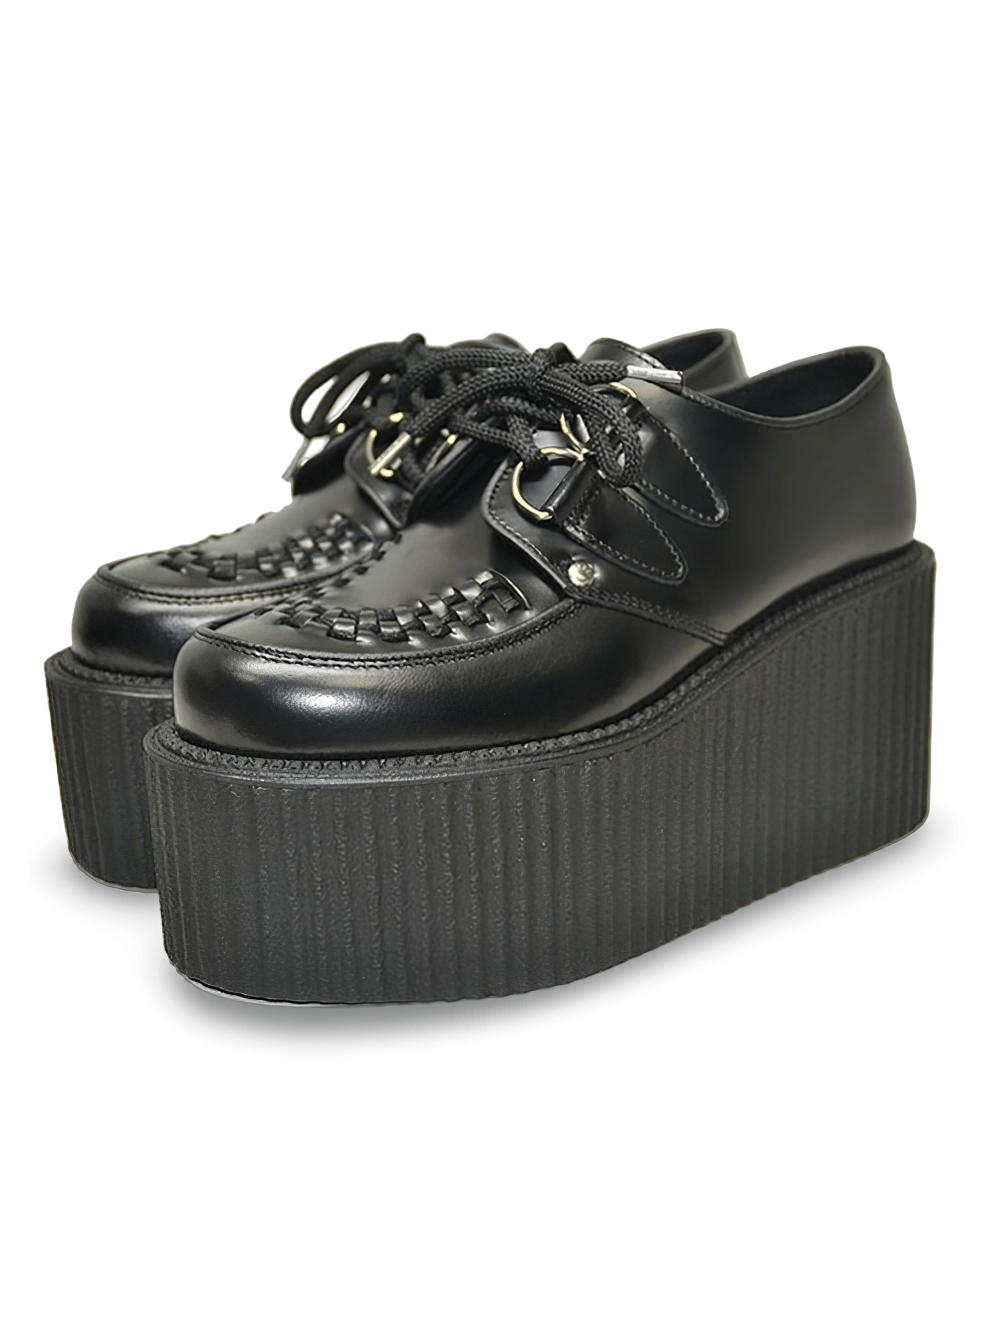 Triple Sole Round Toe Black Box Leather Creepers